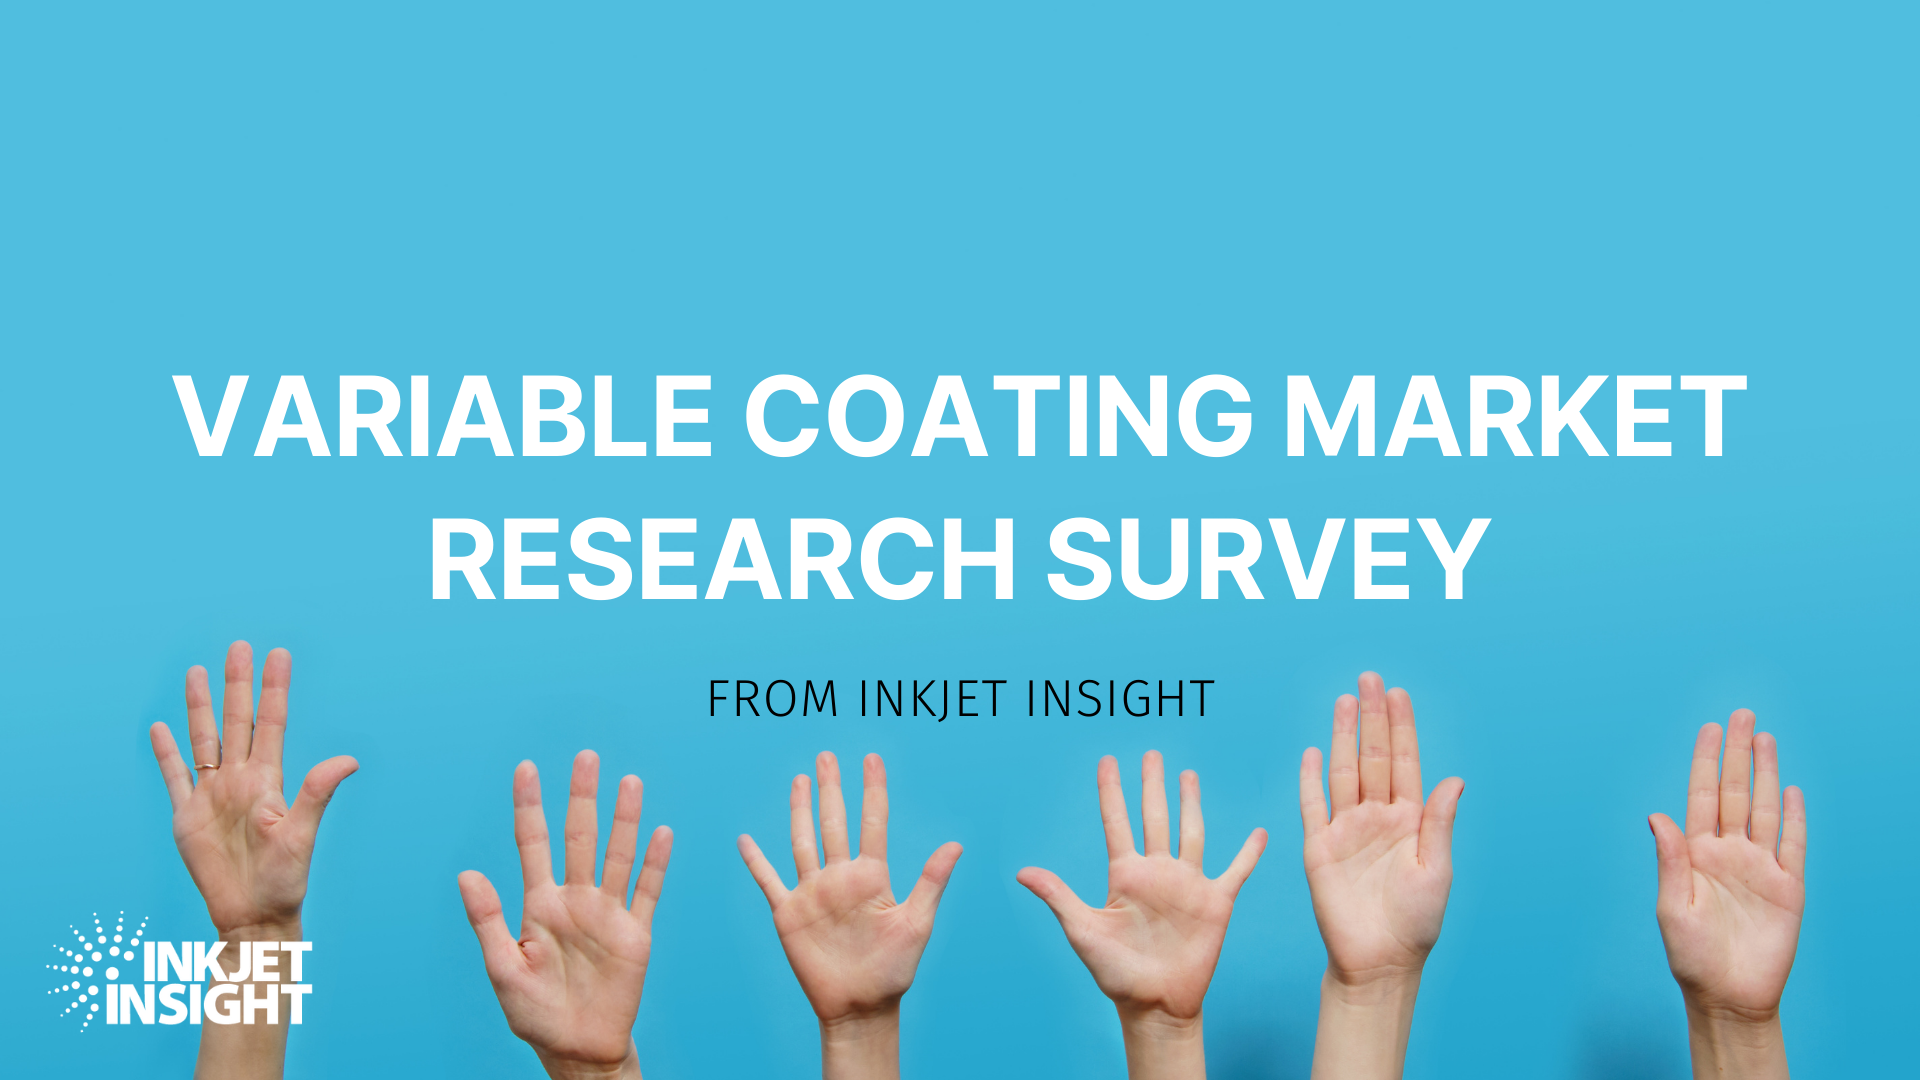 Featured image for “Post Coating Market Research Survey from Inkjet Insight”